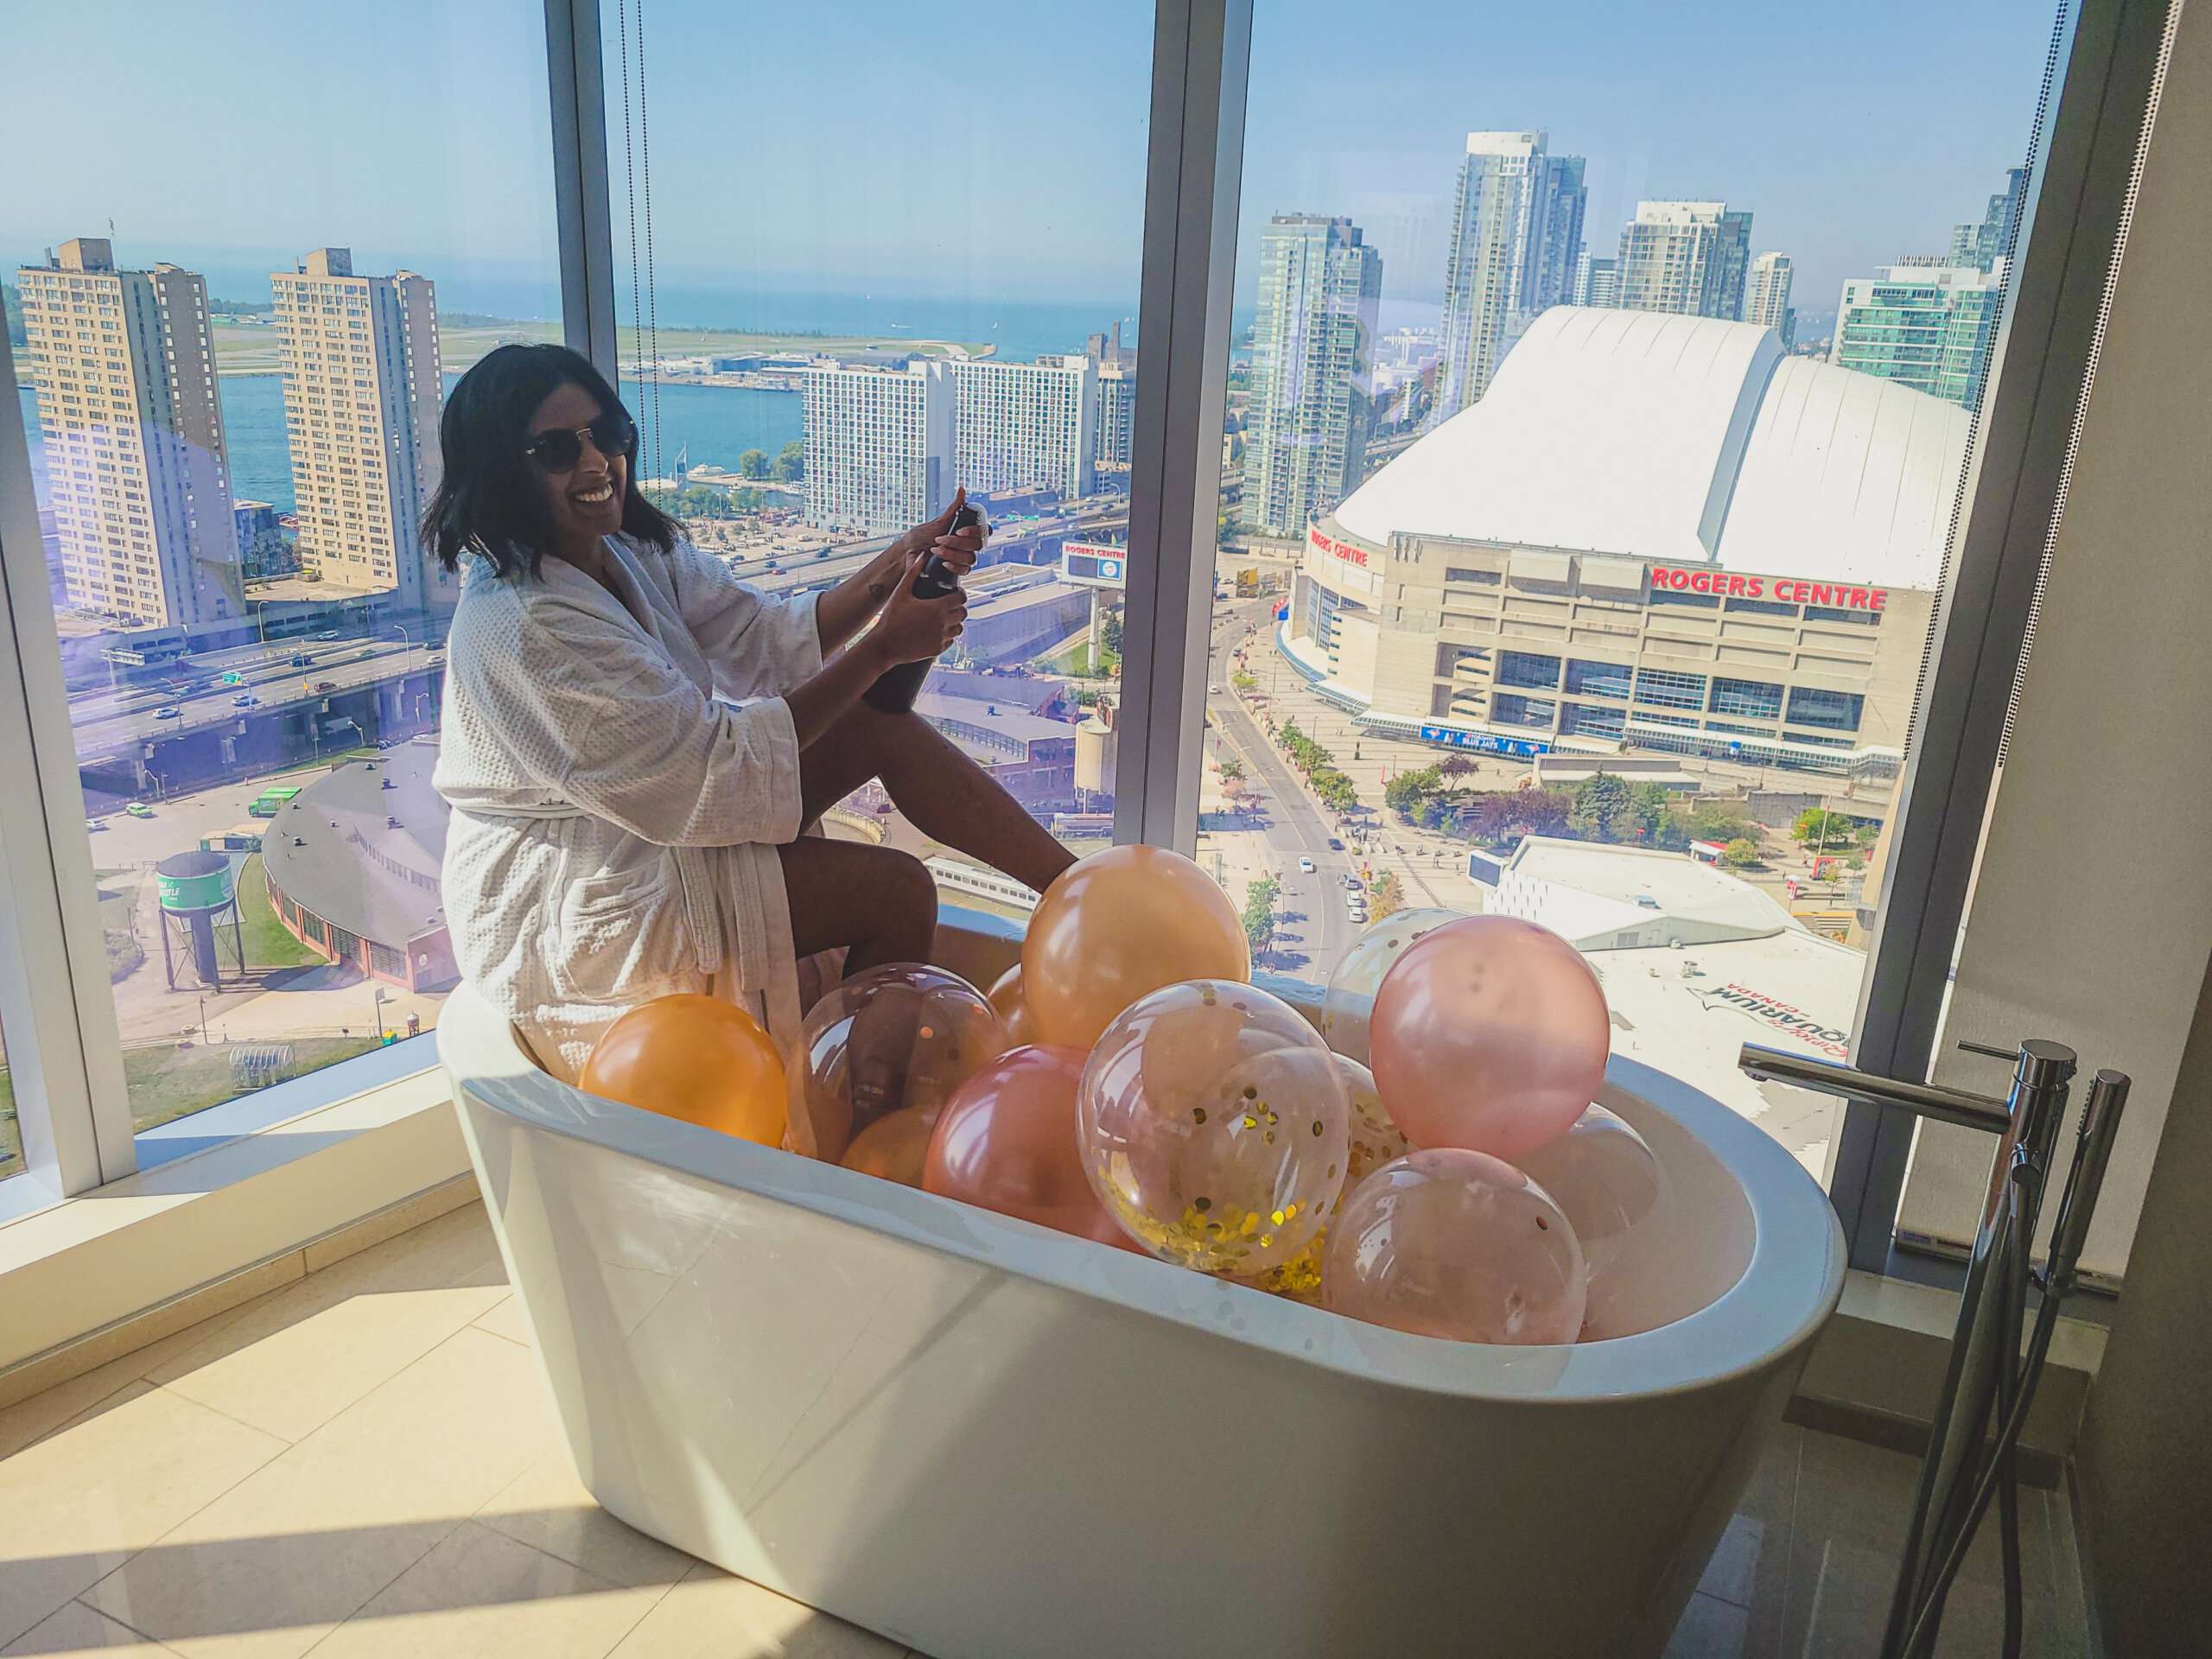 a woman in a white bathrobe sitting on the edge of a bathtub, with large windows overlooking the city with a champagne bottle